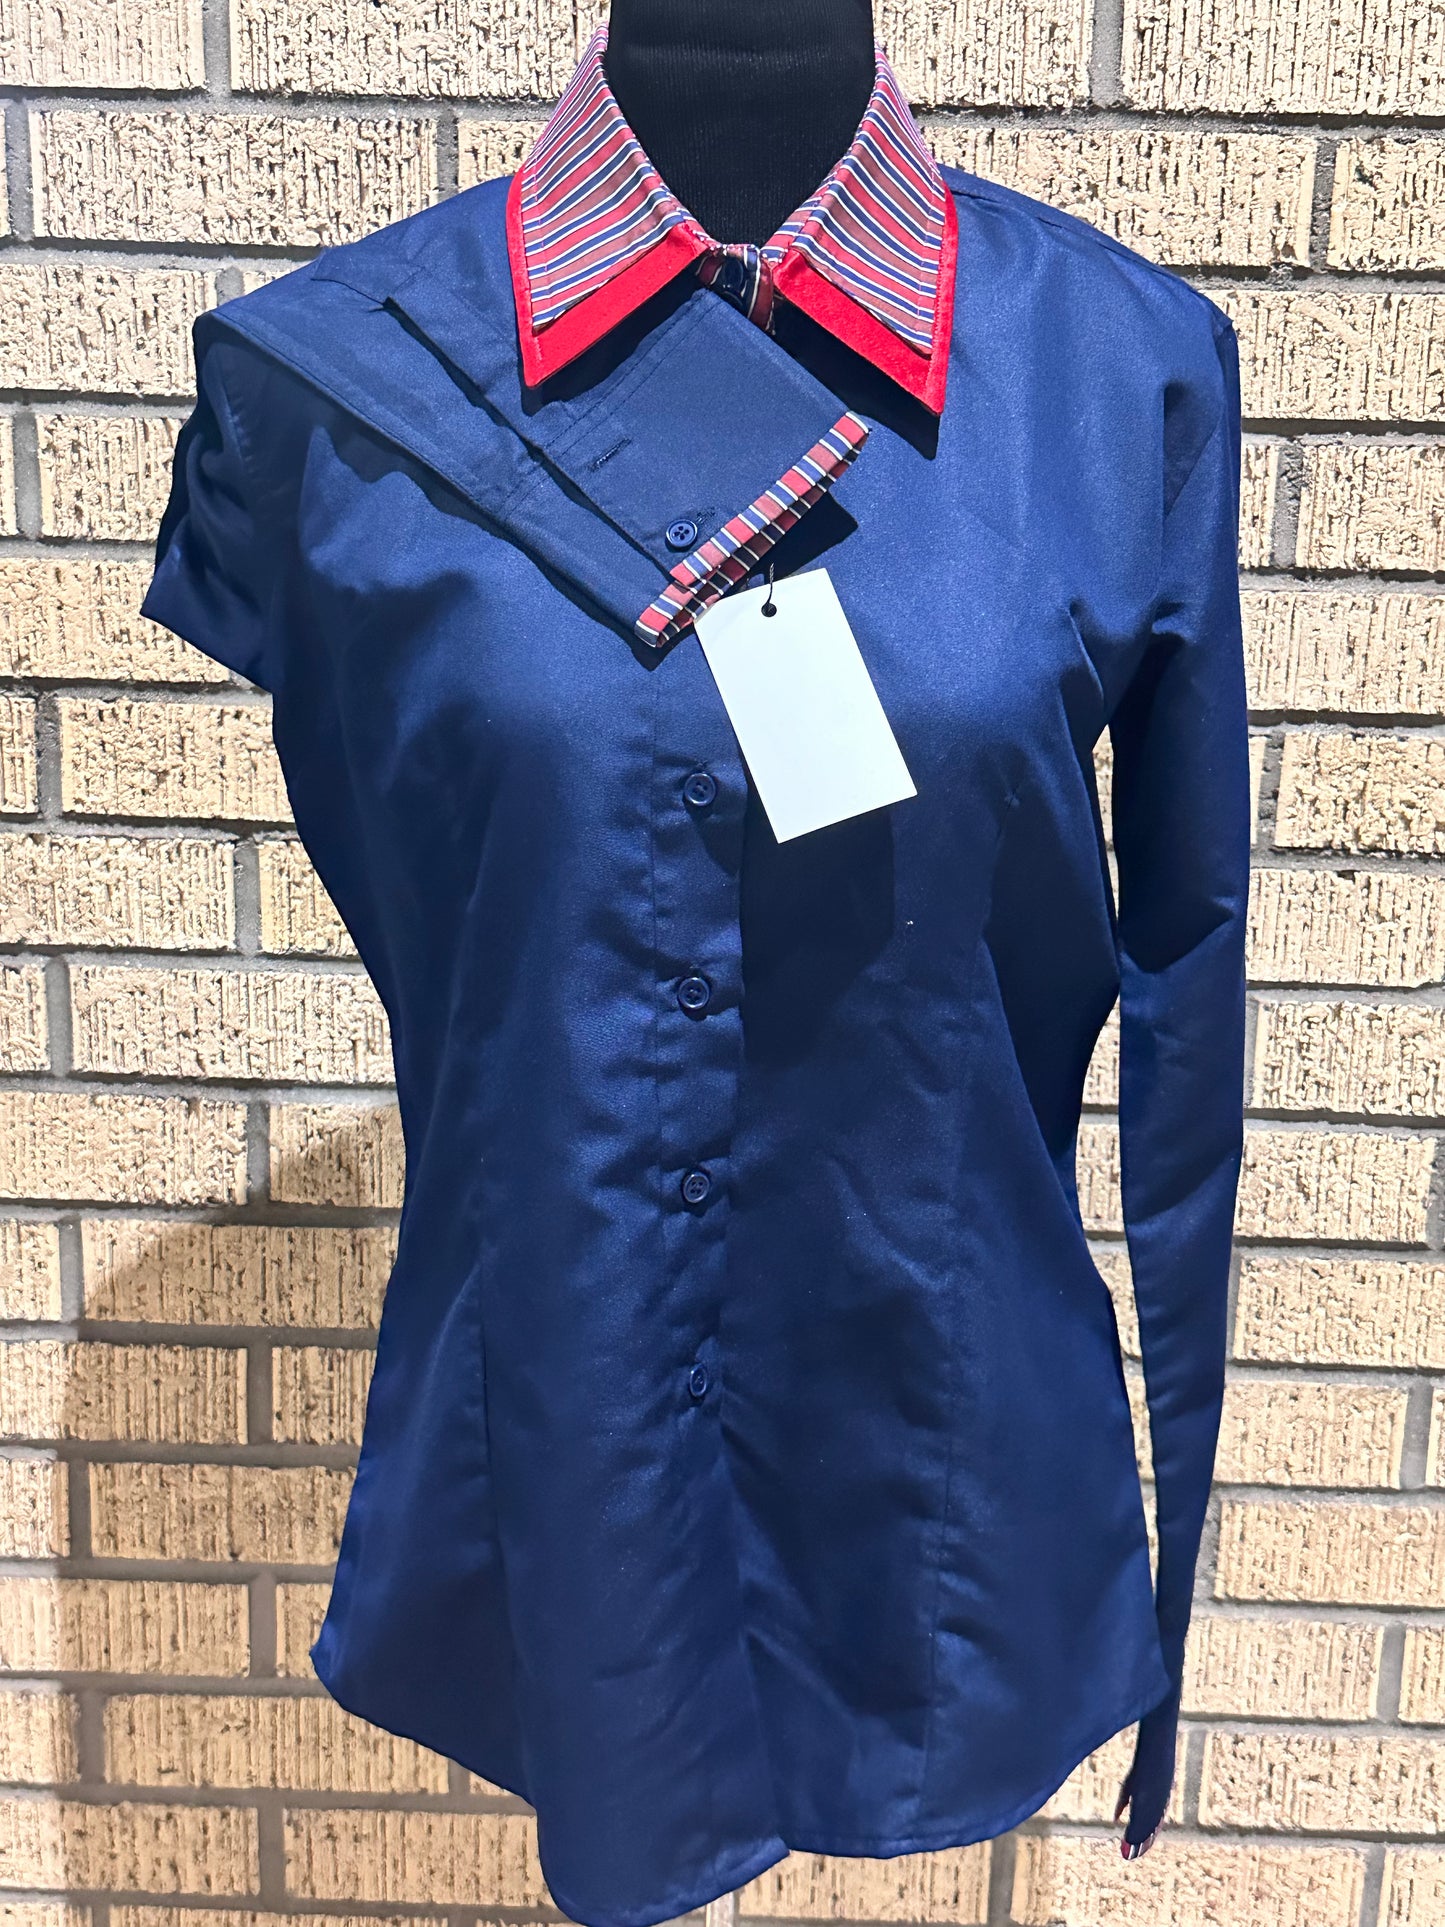 western shirt size large navy with red trims